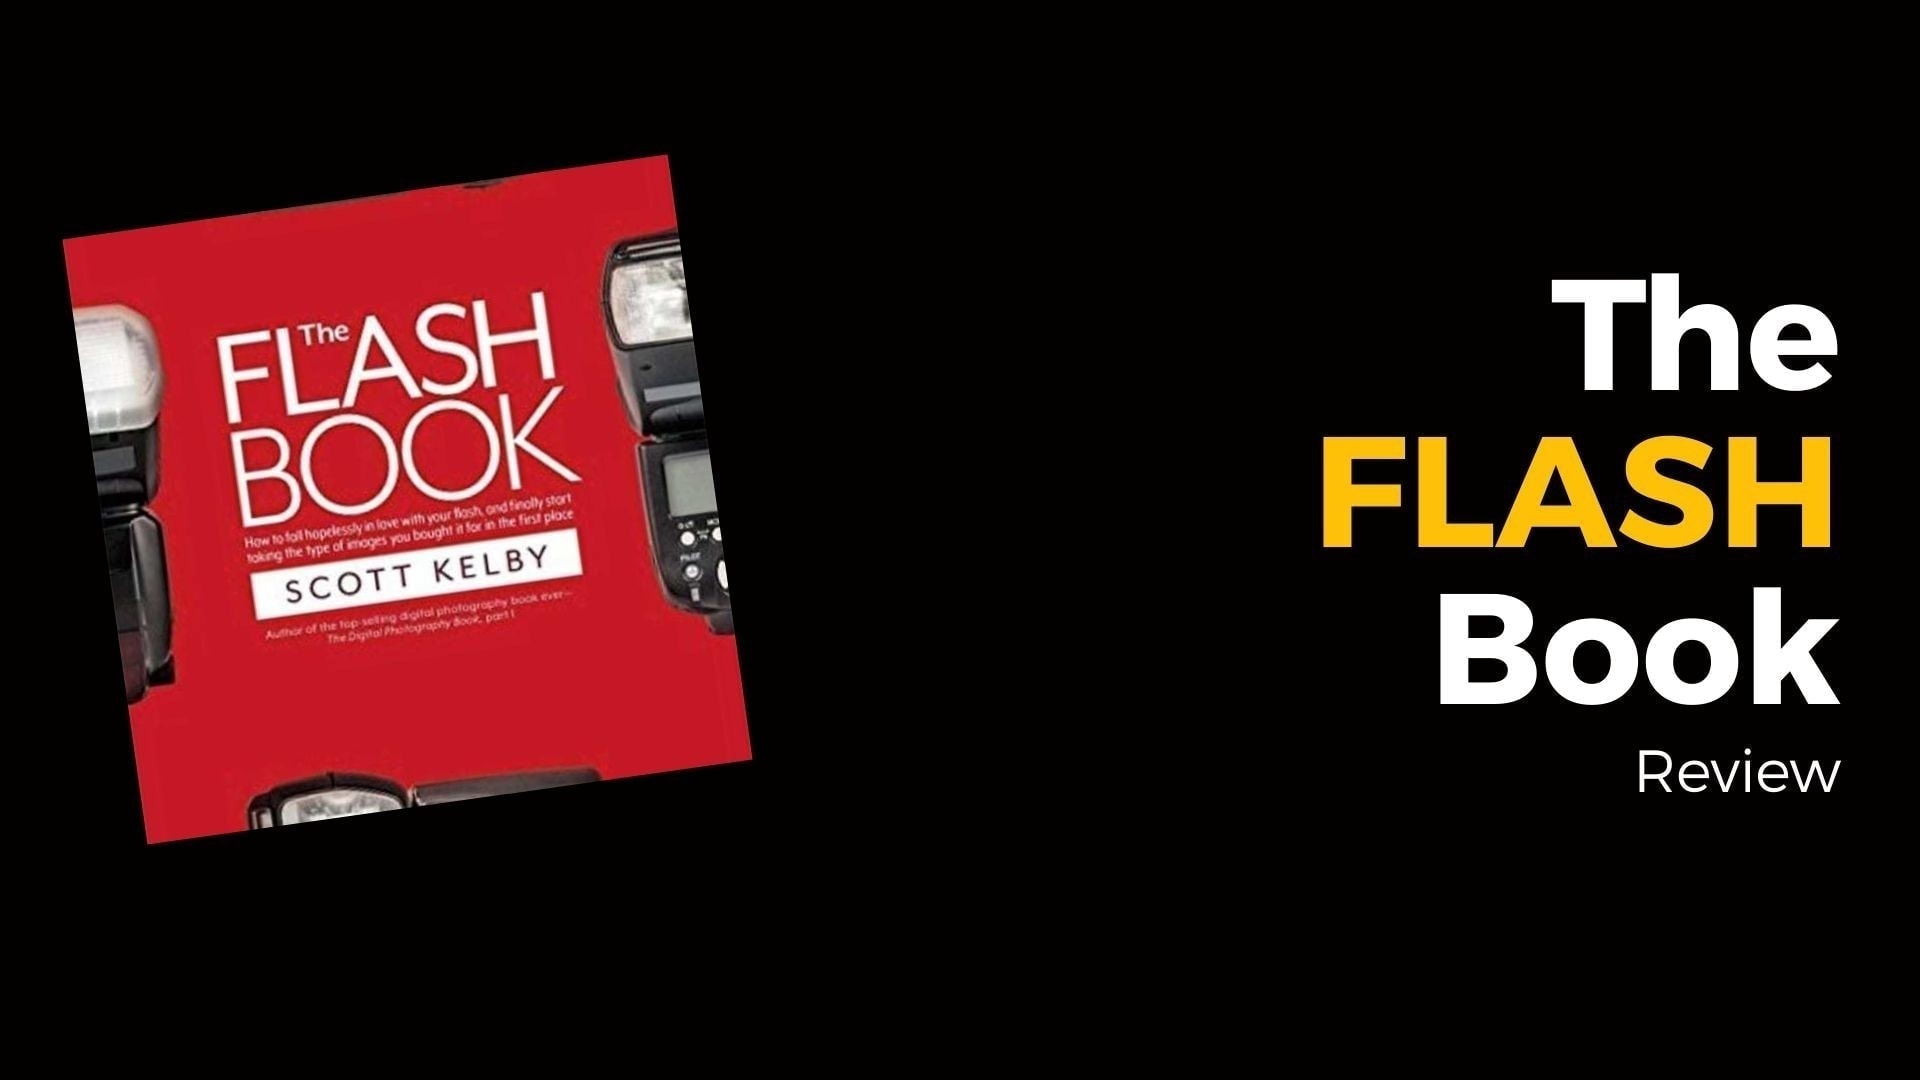 The Flash Book Review